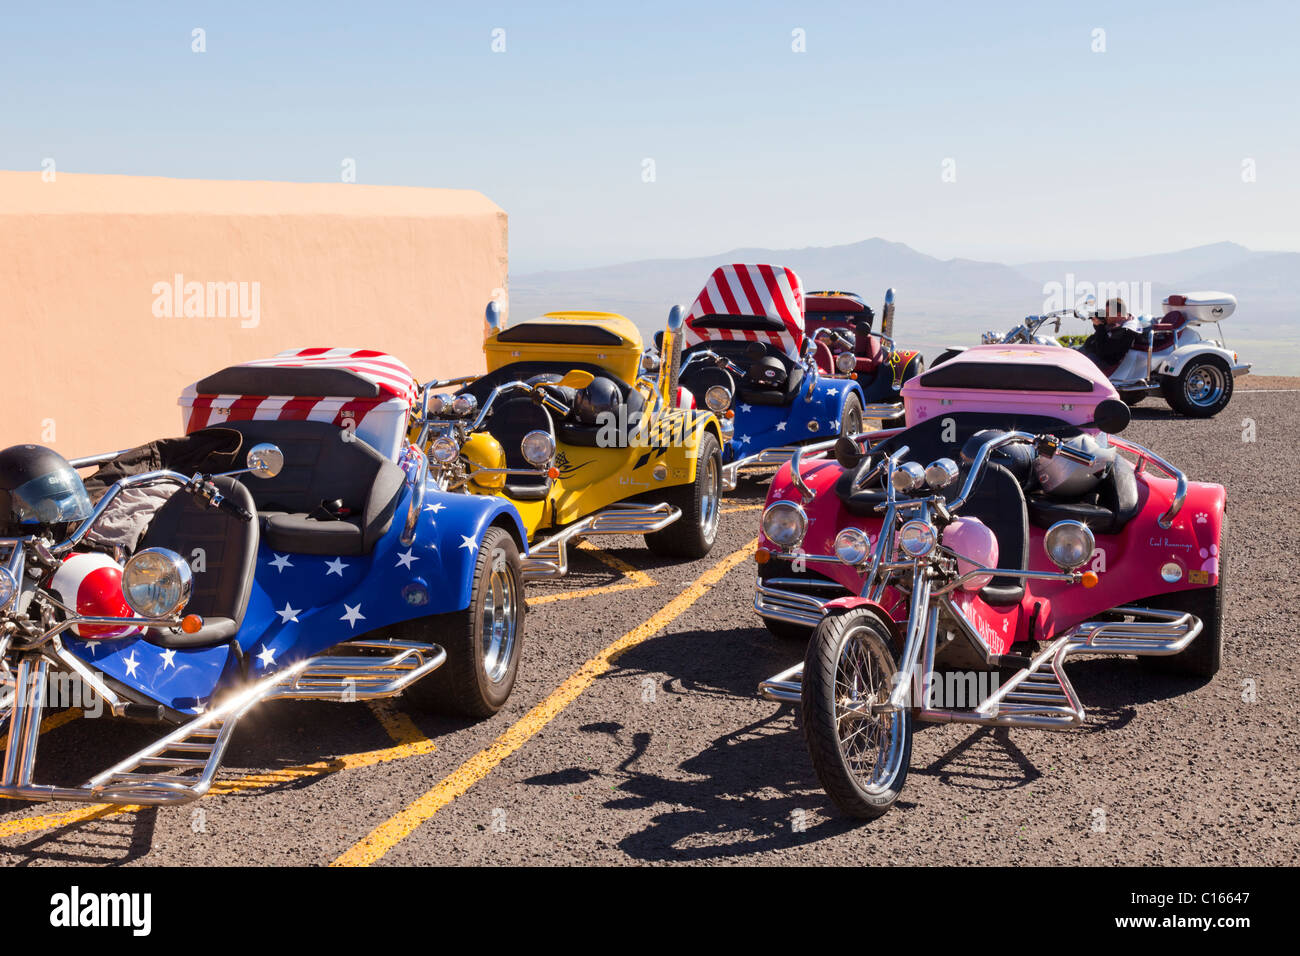 Motorcycle cruiser trikes for transporting tourists, parked at Mirador de Morro Velosa, on the Canary Island of Fuerteventura Stock Photo